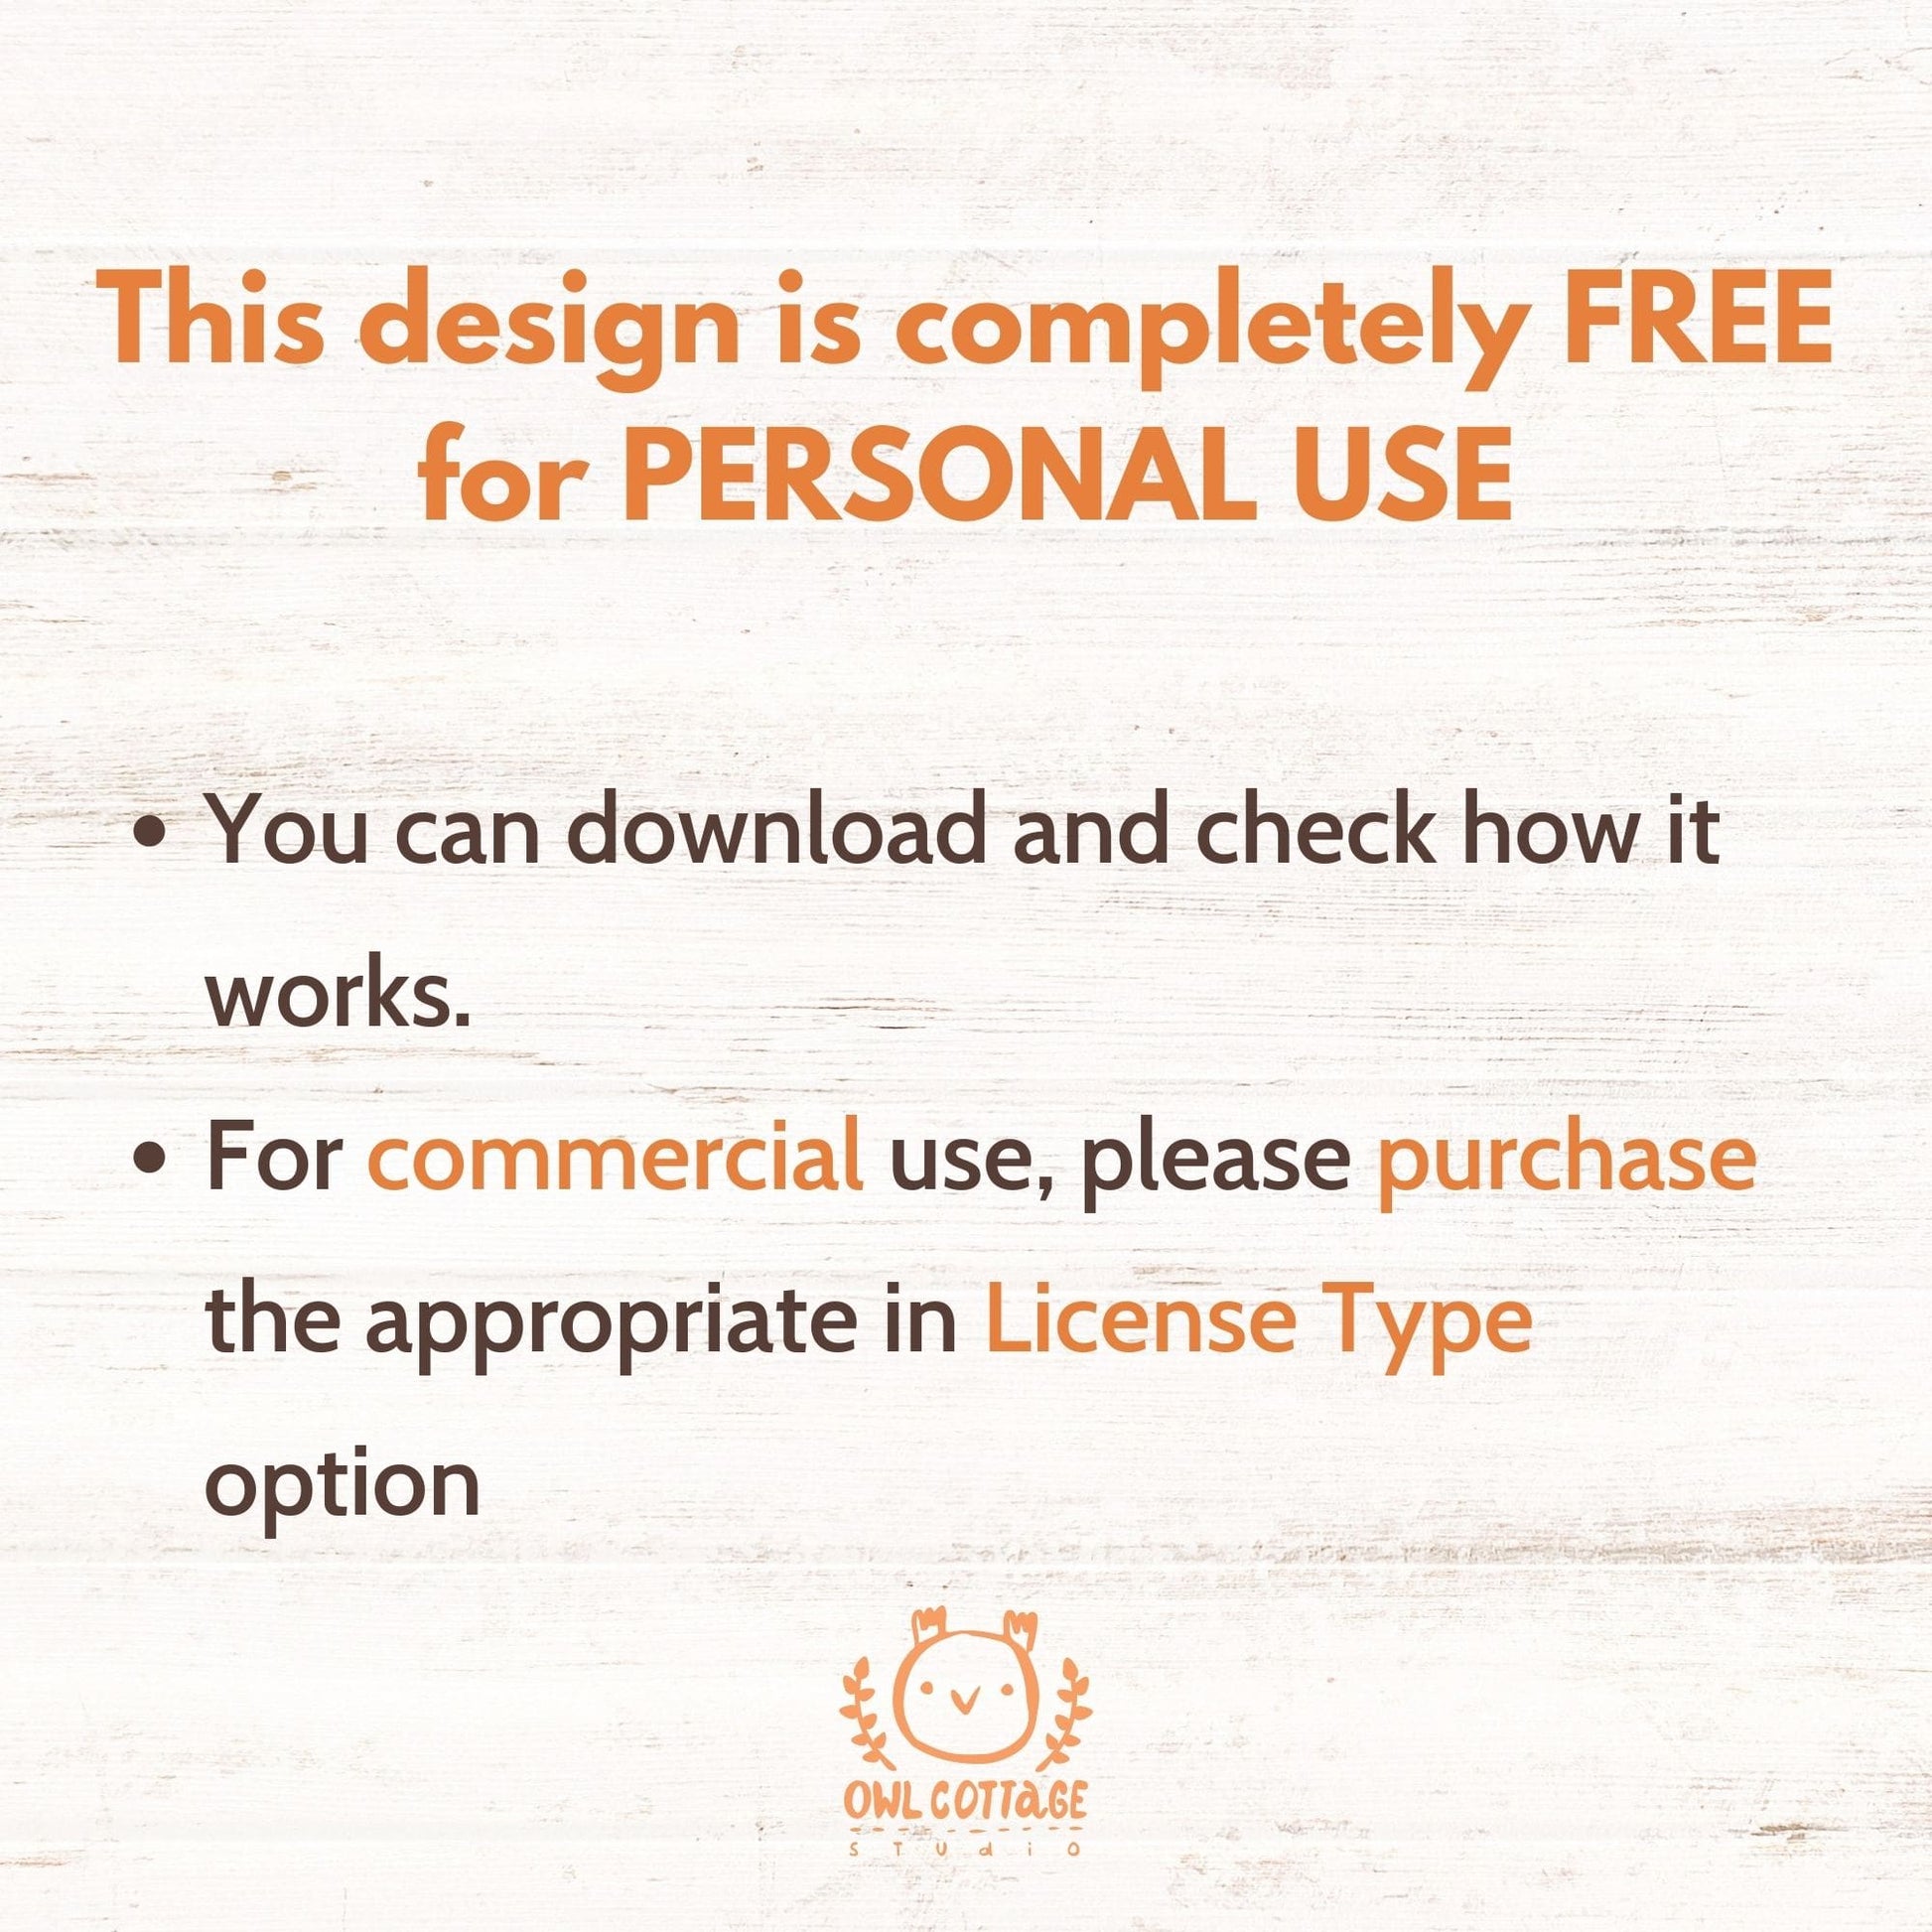 The design by Owl Cottage Studio is Free For Personal Use